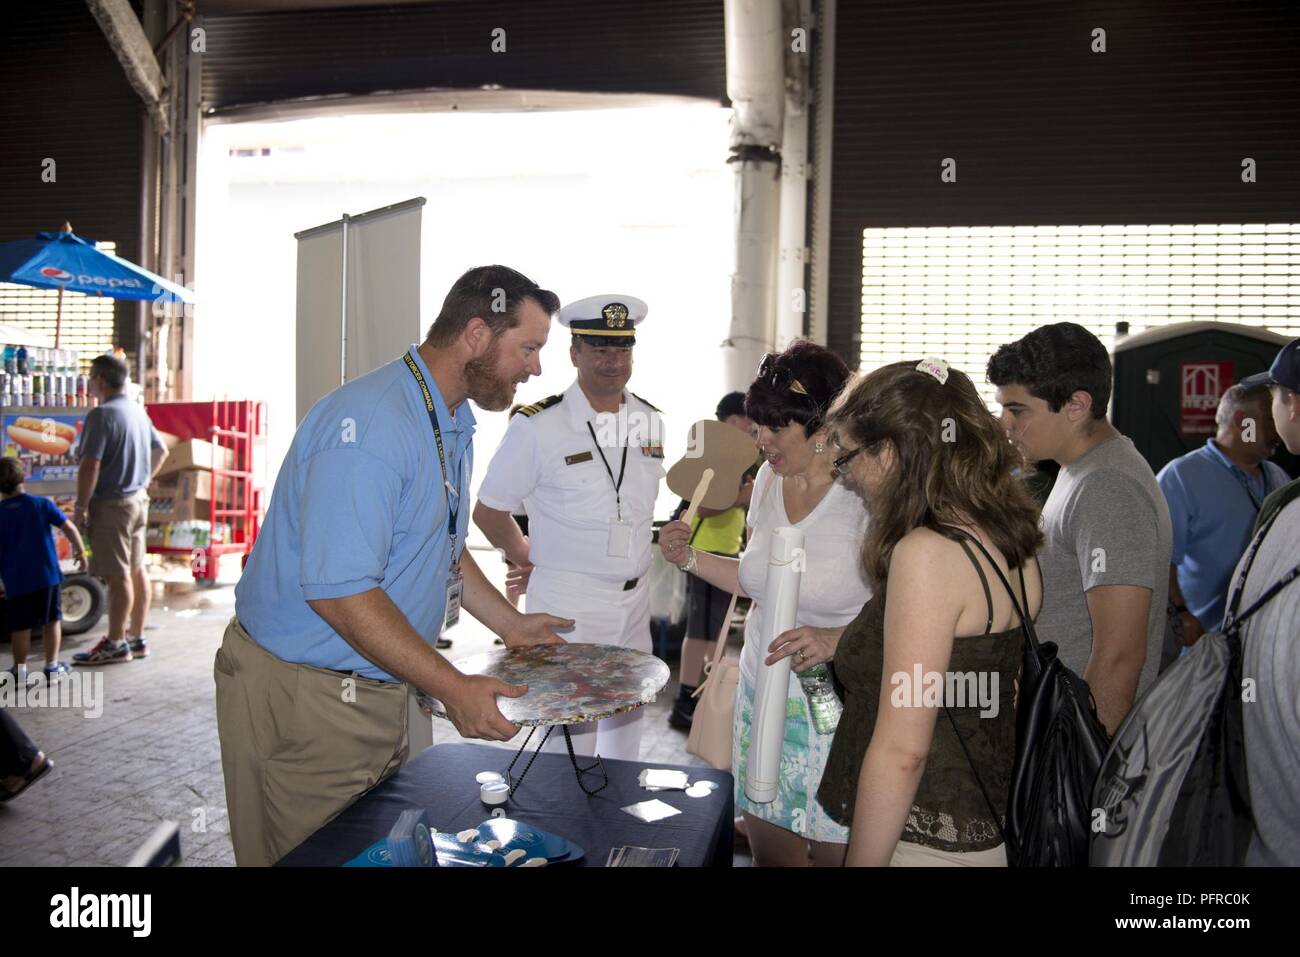 NEW YORK (May 26, 2018) Michael Jones, the environmental resources and planning section head for U.S. Fleet Forces Command’s Fleet Environmental and Readiness Division, explains the shipboard waste process to reduce plastic waste aboard ships at the U.S. Navy’s “Stewards of the Sea: Defending Freedom, Protecting the Environment” exhibit during Fleet Week New York. The Navy employs every means available to mitigate the potential environmental effects of our activities without jeopardizing the safety of our Sailors or impacting our Navy readiness mission. Stock Photo